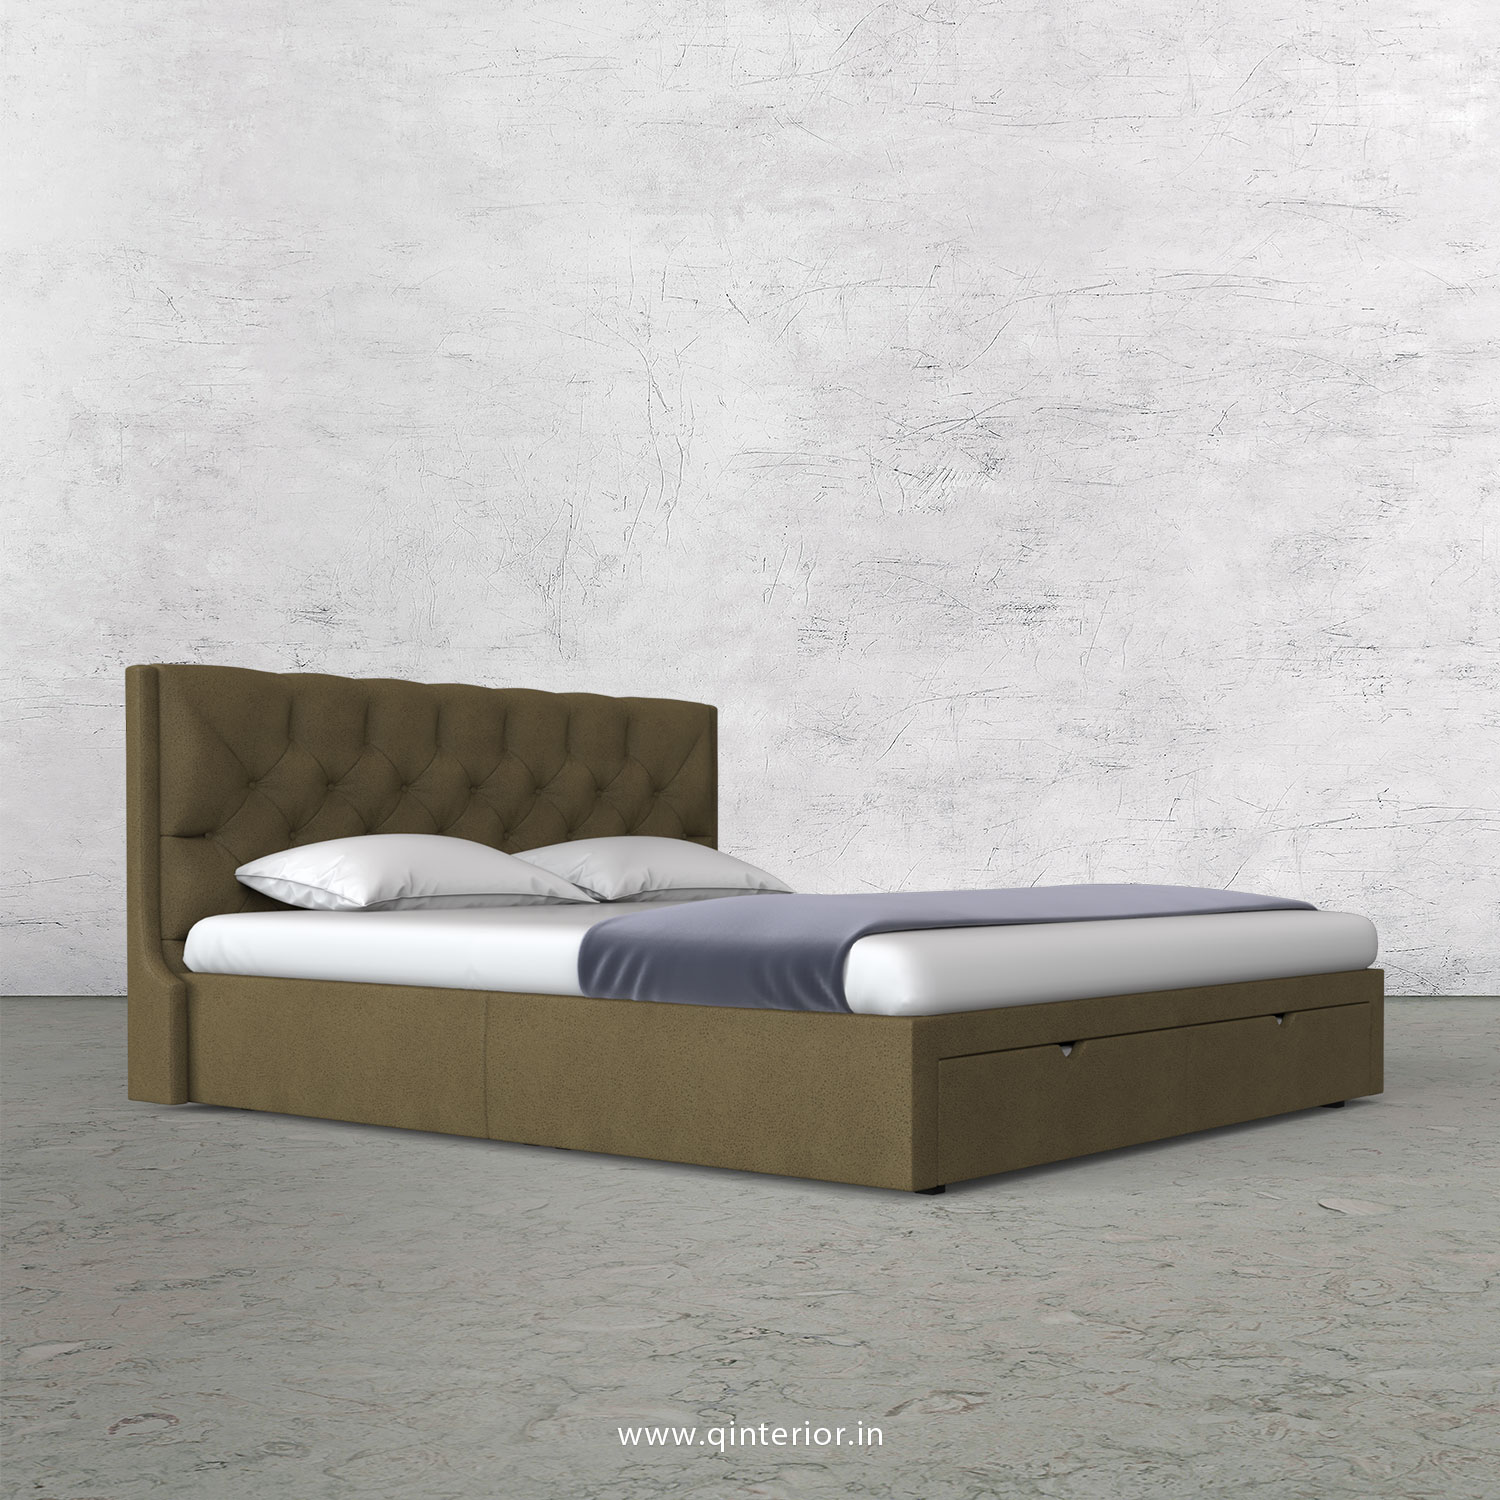 Scorpius King Size Storage Bed in Fab Leather Fabric - KBD001 FL01